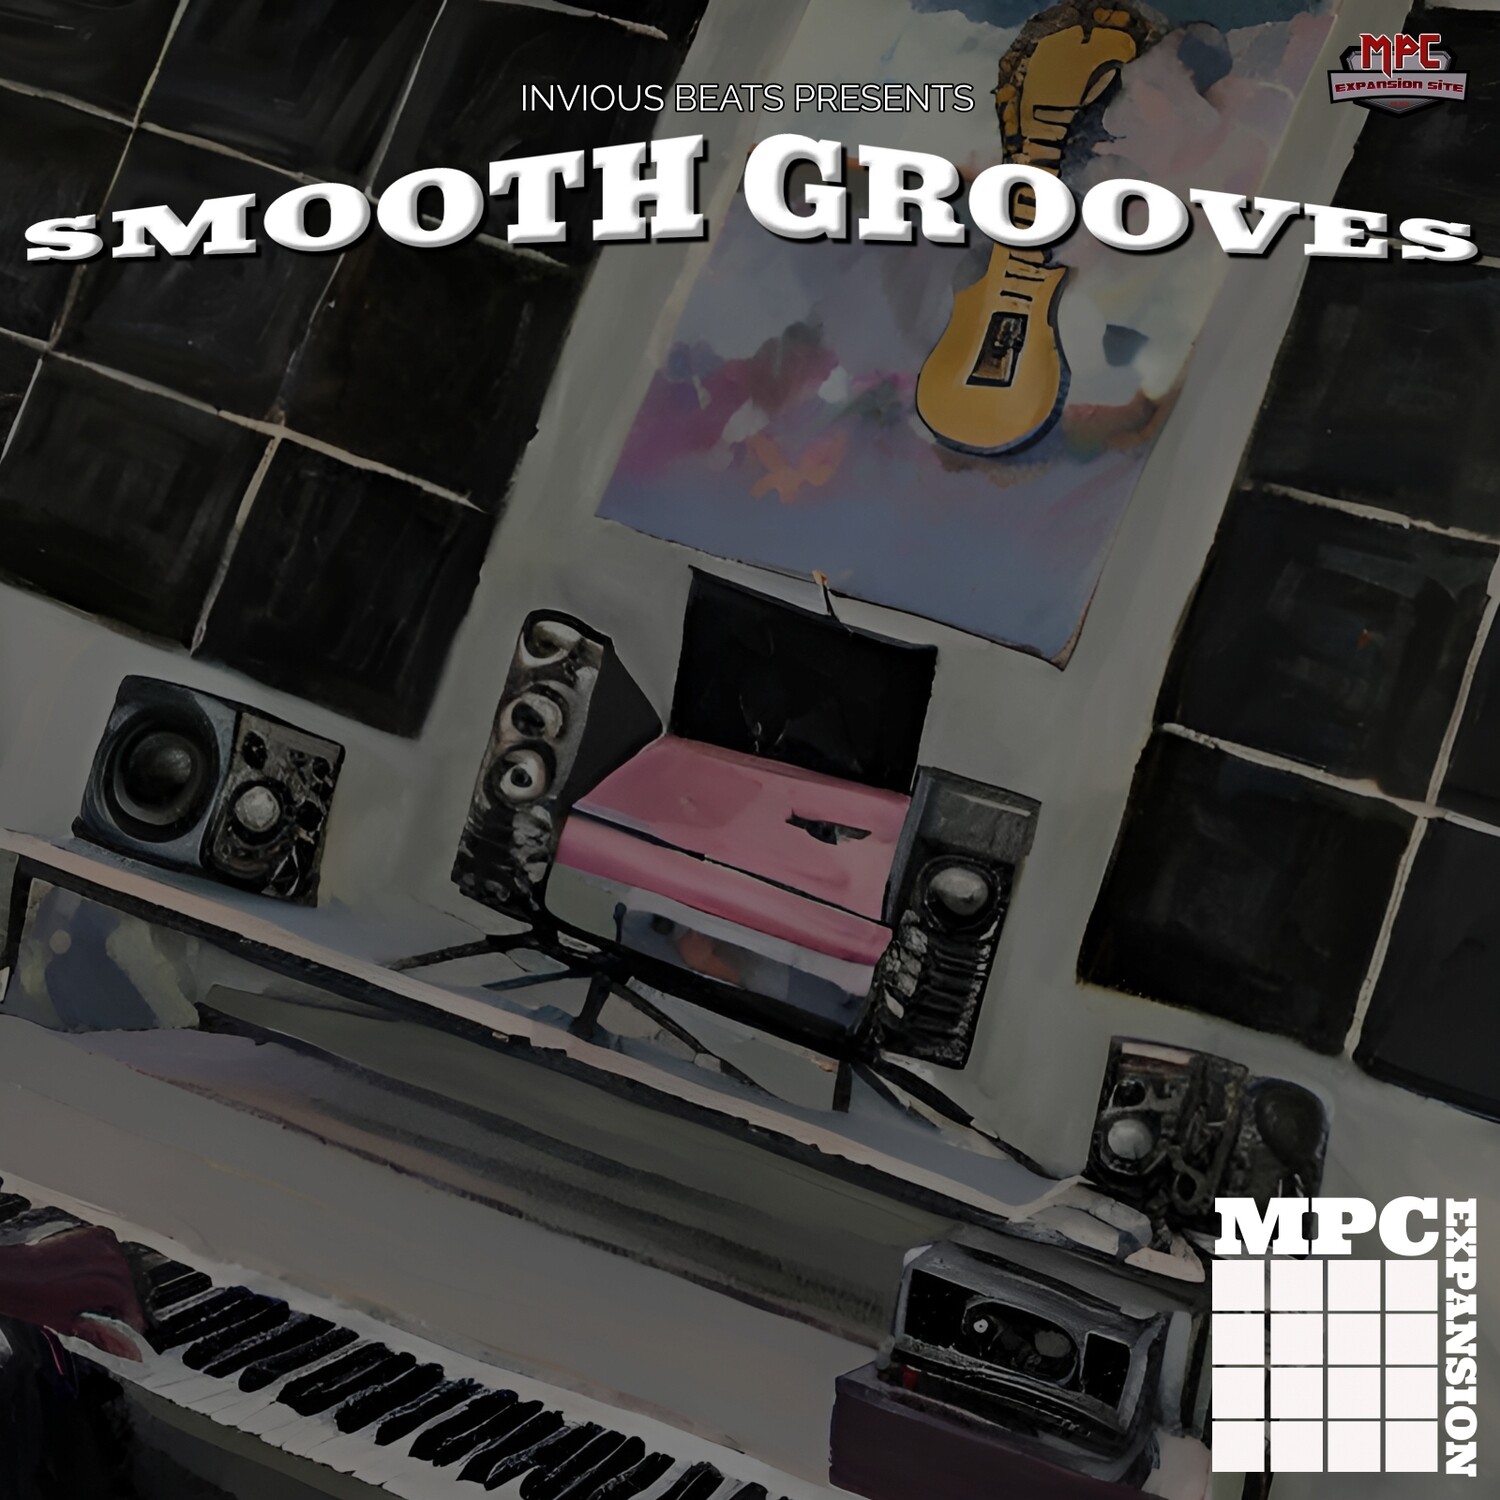 MPC EXPANSION 'SMOOTH GROOVES' by INVIOUS